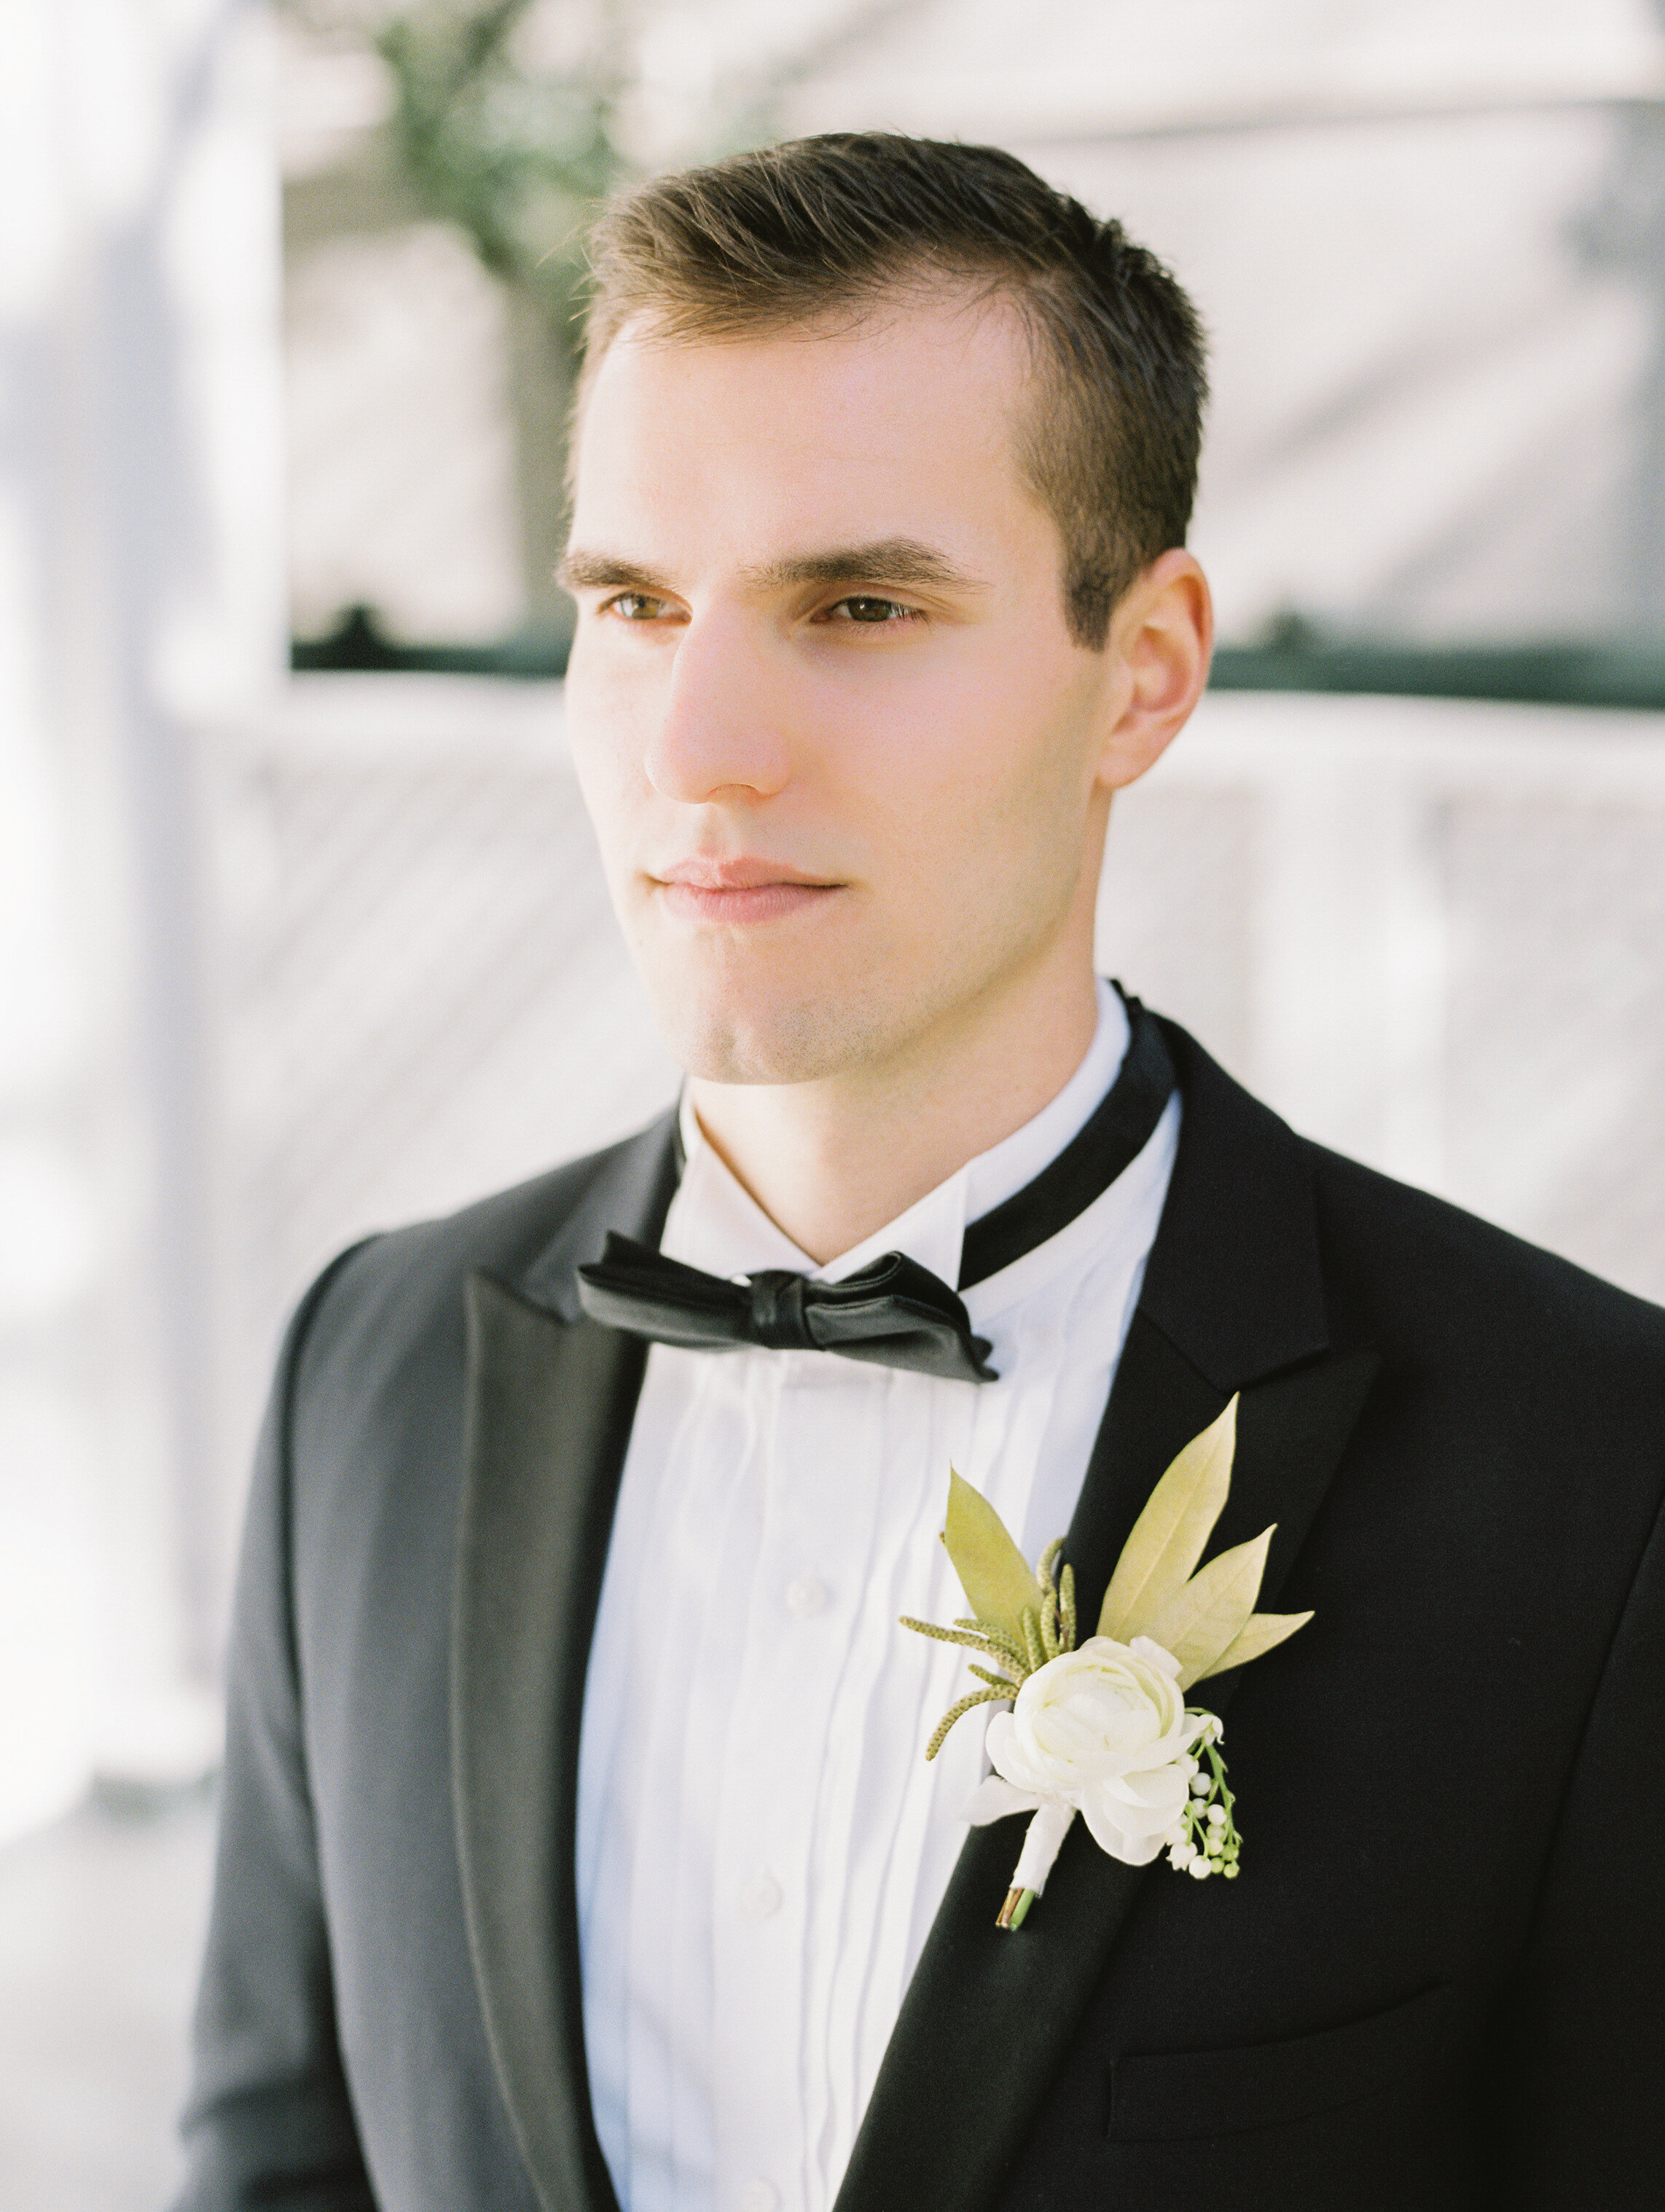 DAR Rainier Chapter House Wedding Groom Tuxedo | Pacific Engagements Seattle Bride and Groom | Botanique Flowers Seattle